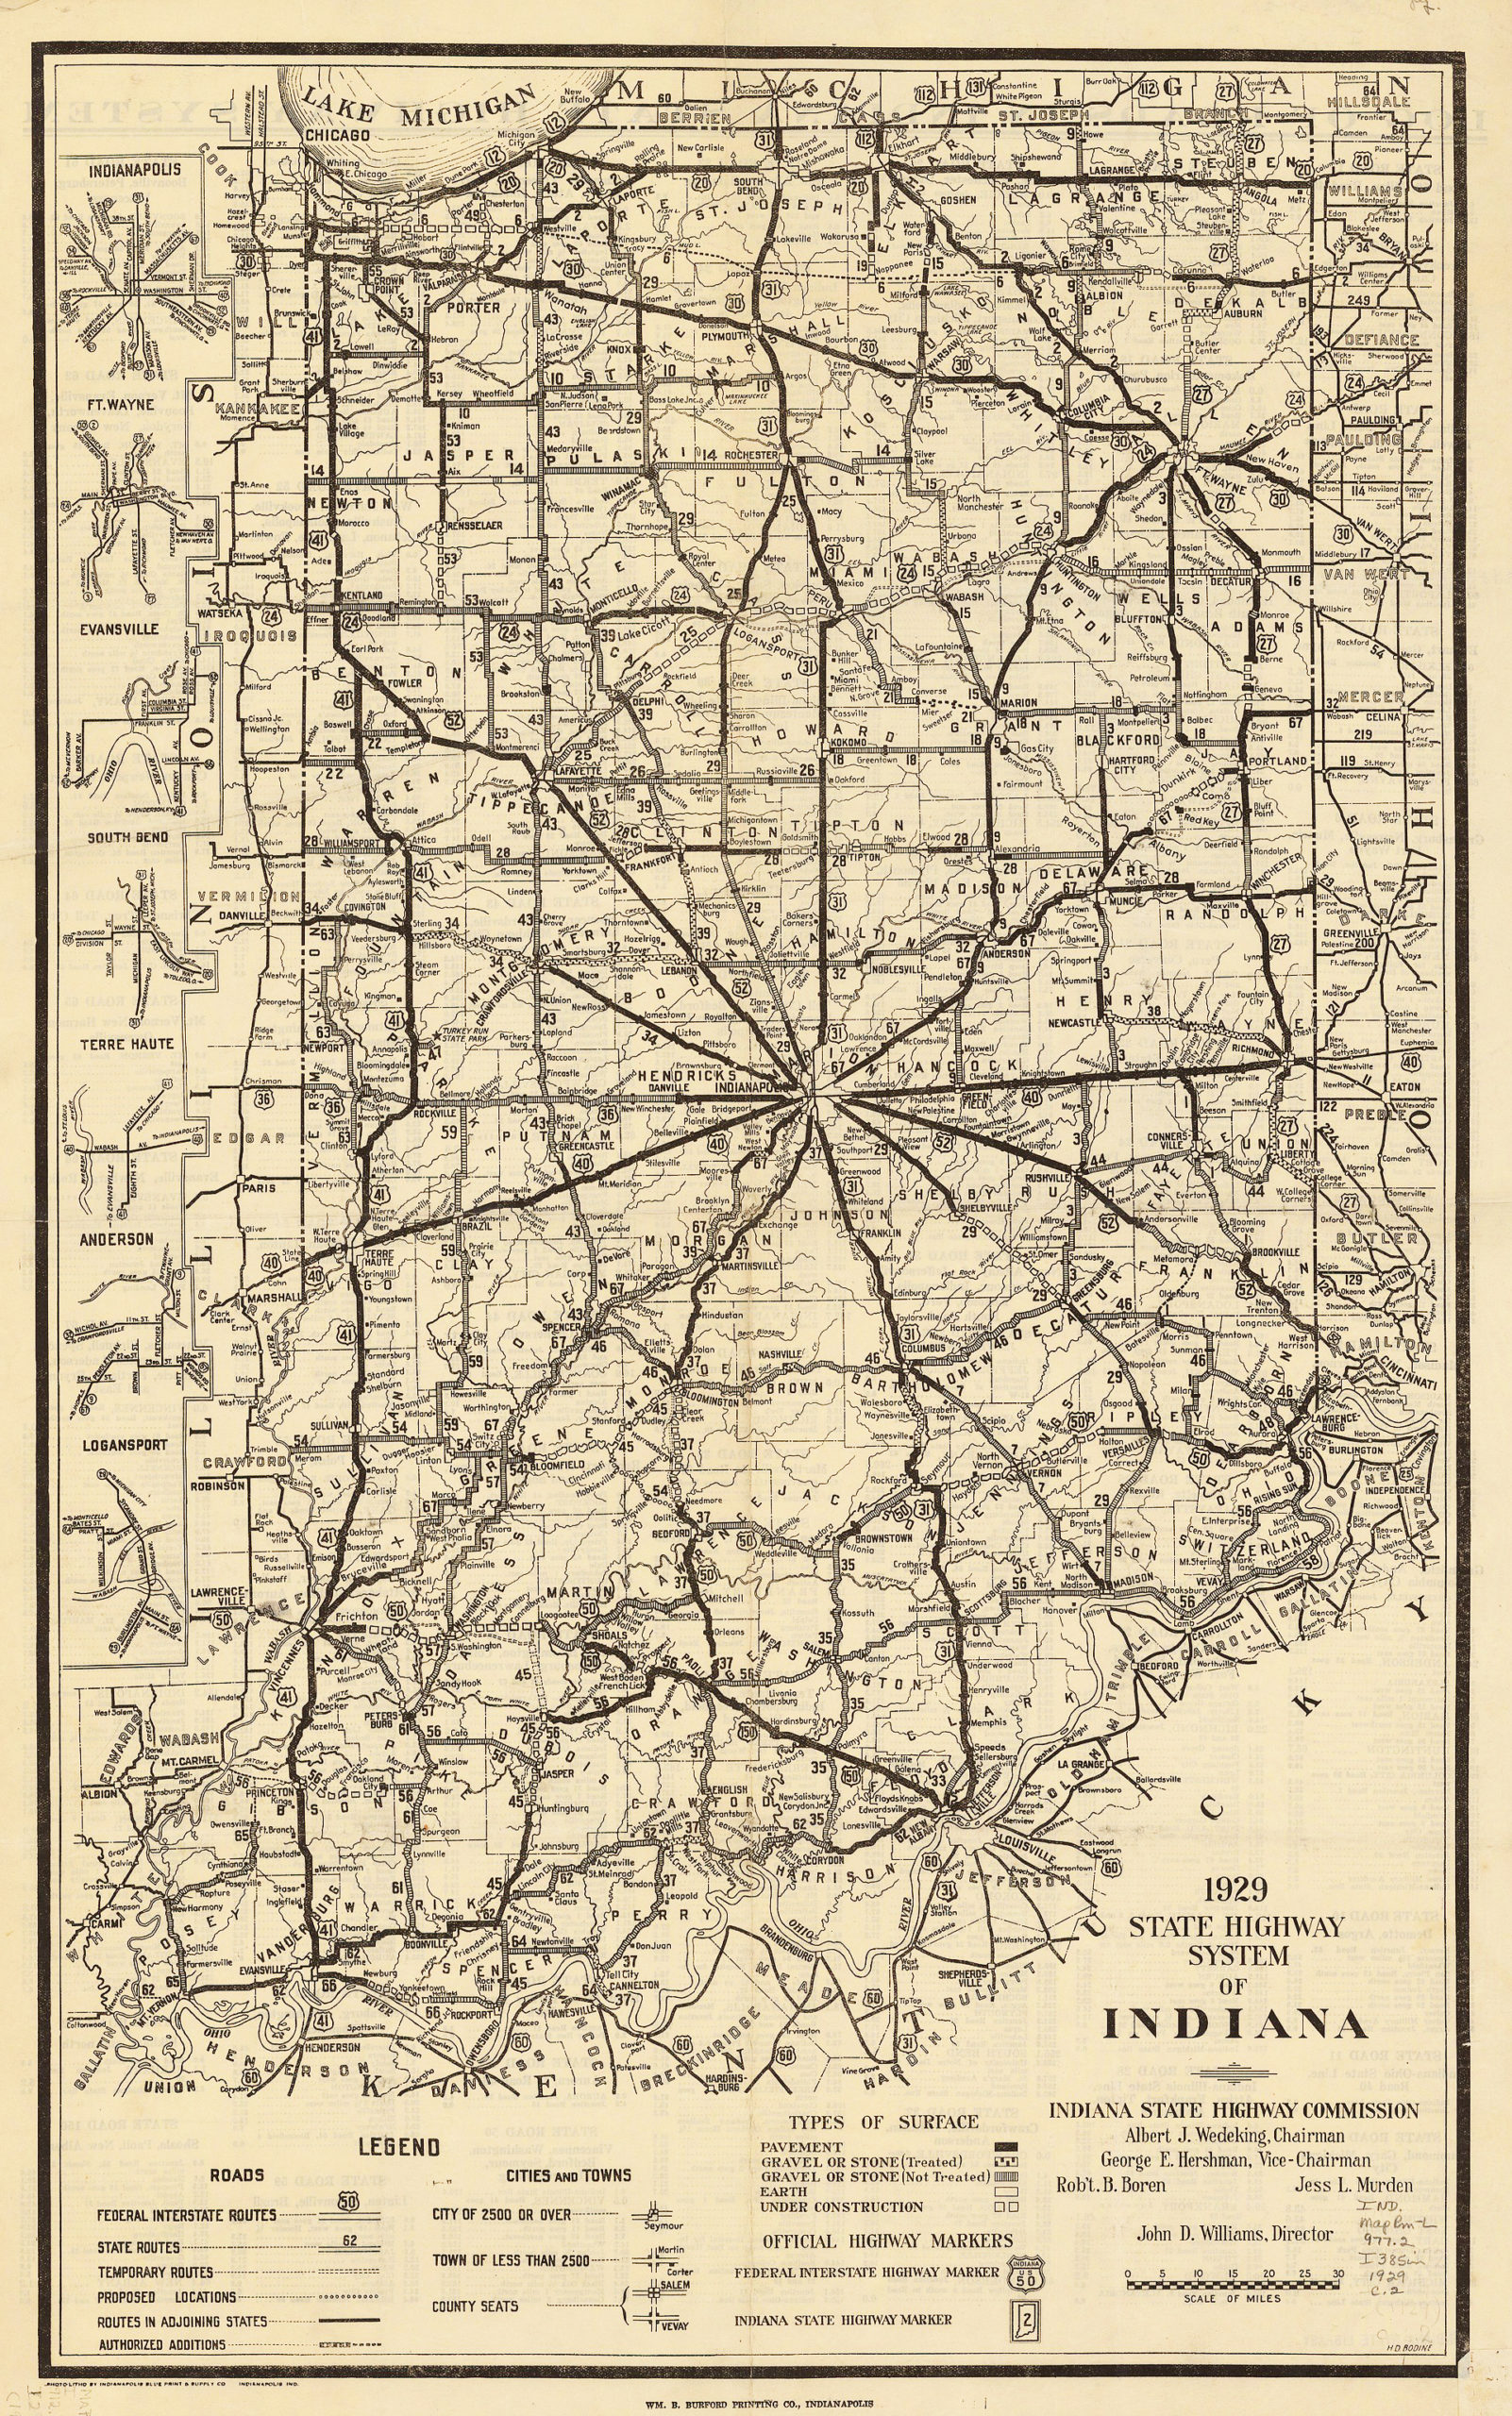 1929 Indiana state highway system map